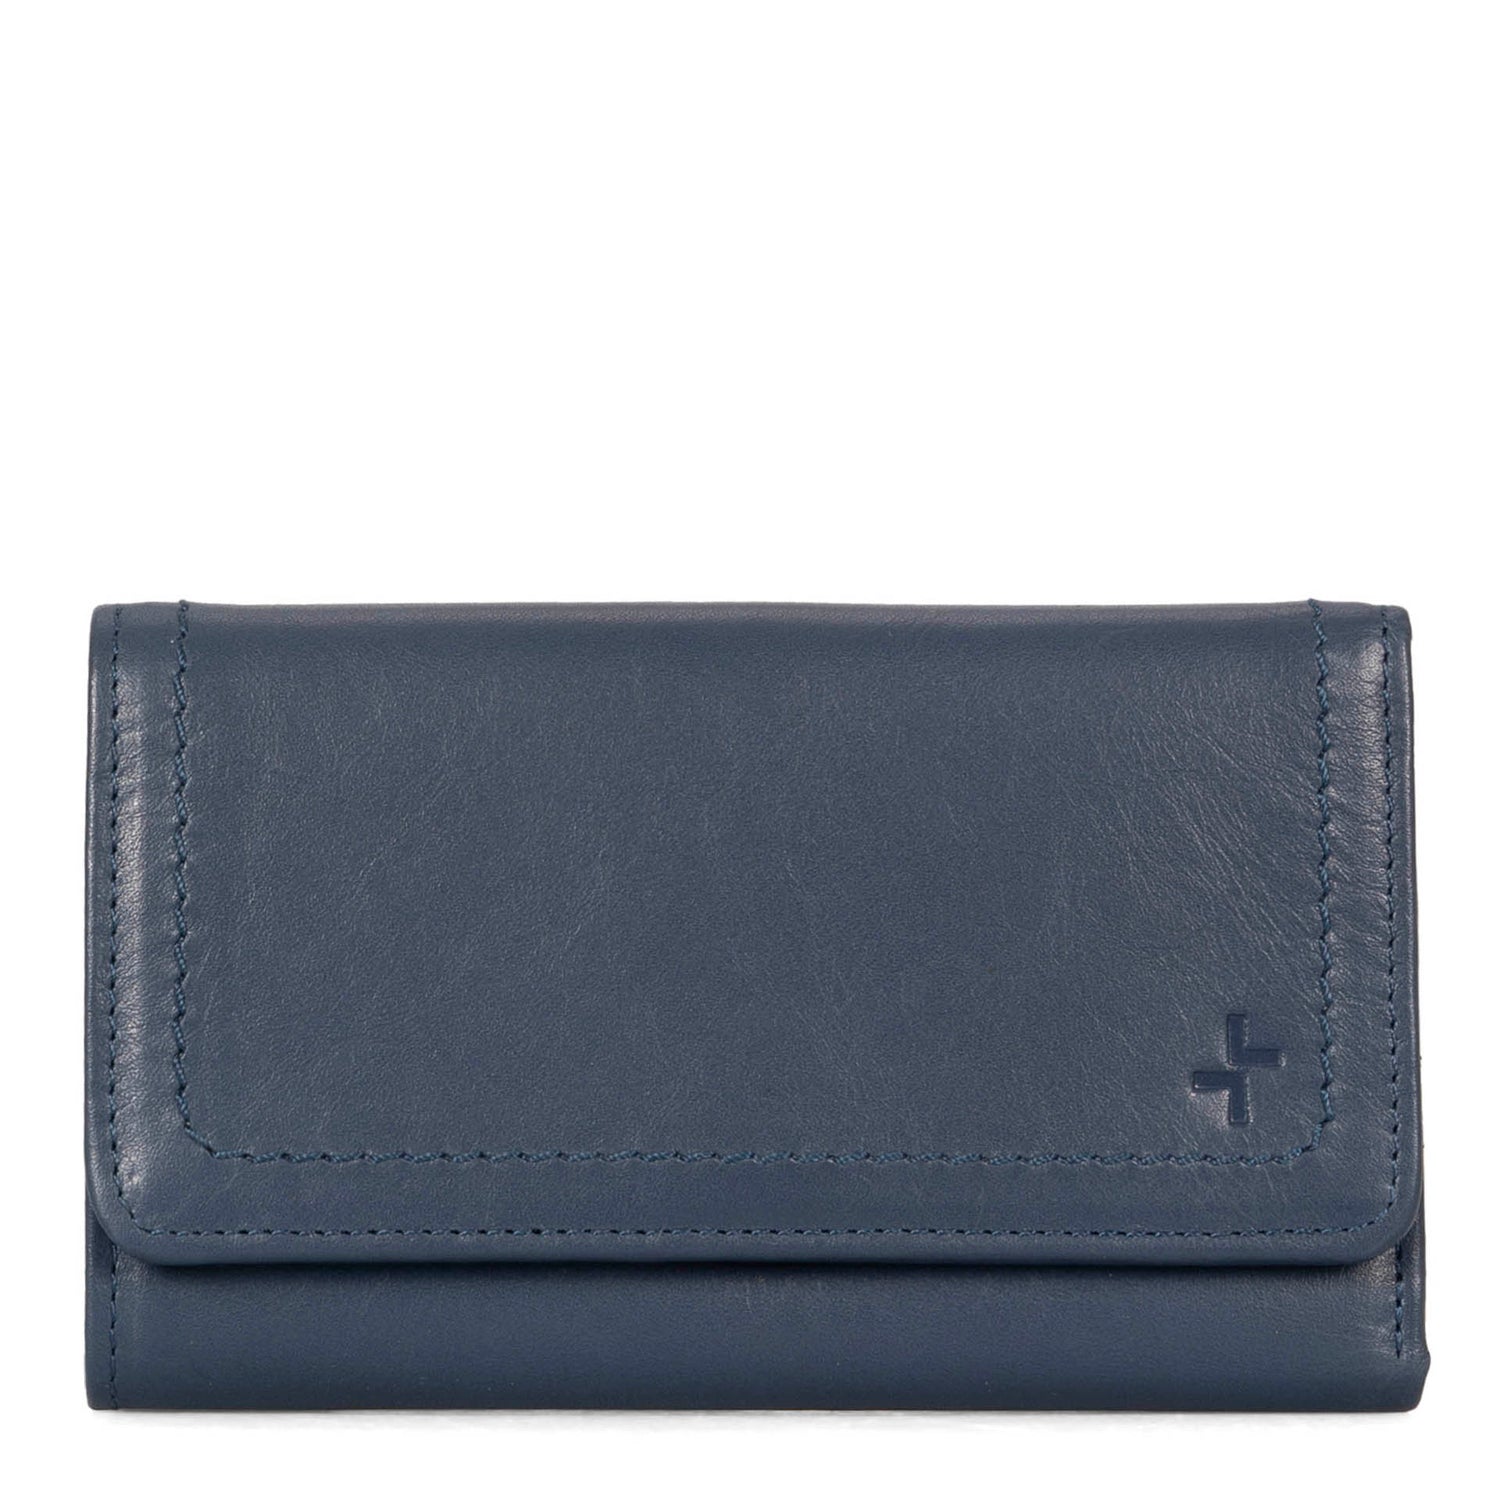 Front side of a blue flap wallet for women called Kara designed by Tracker showing its logo and soft leather.